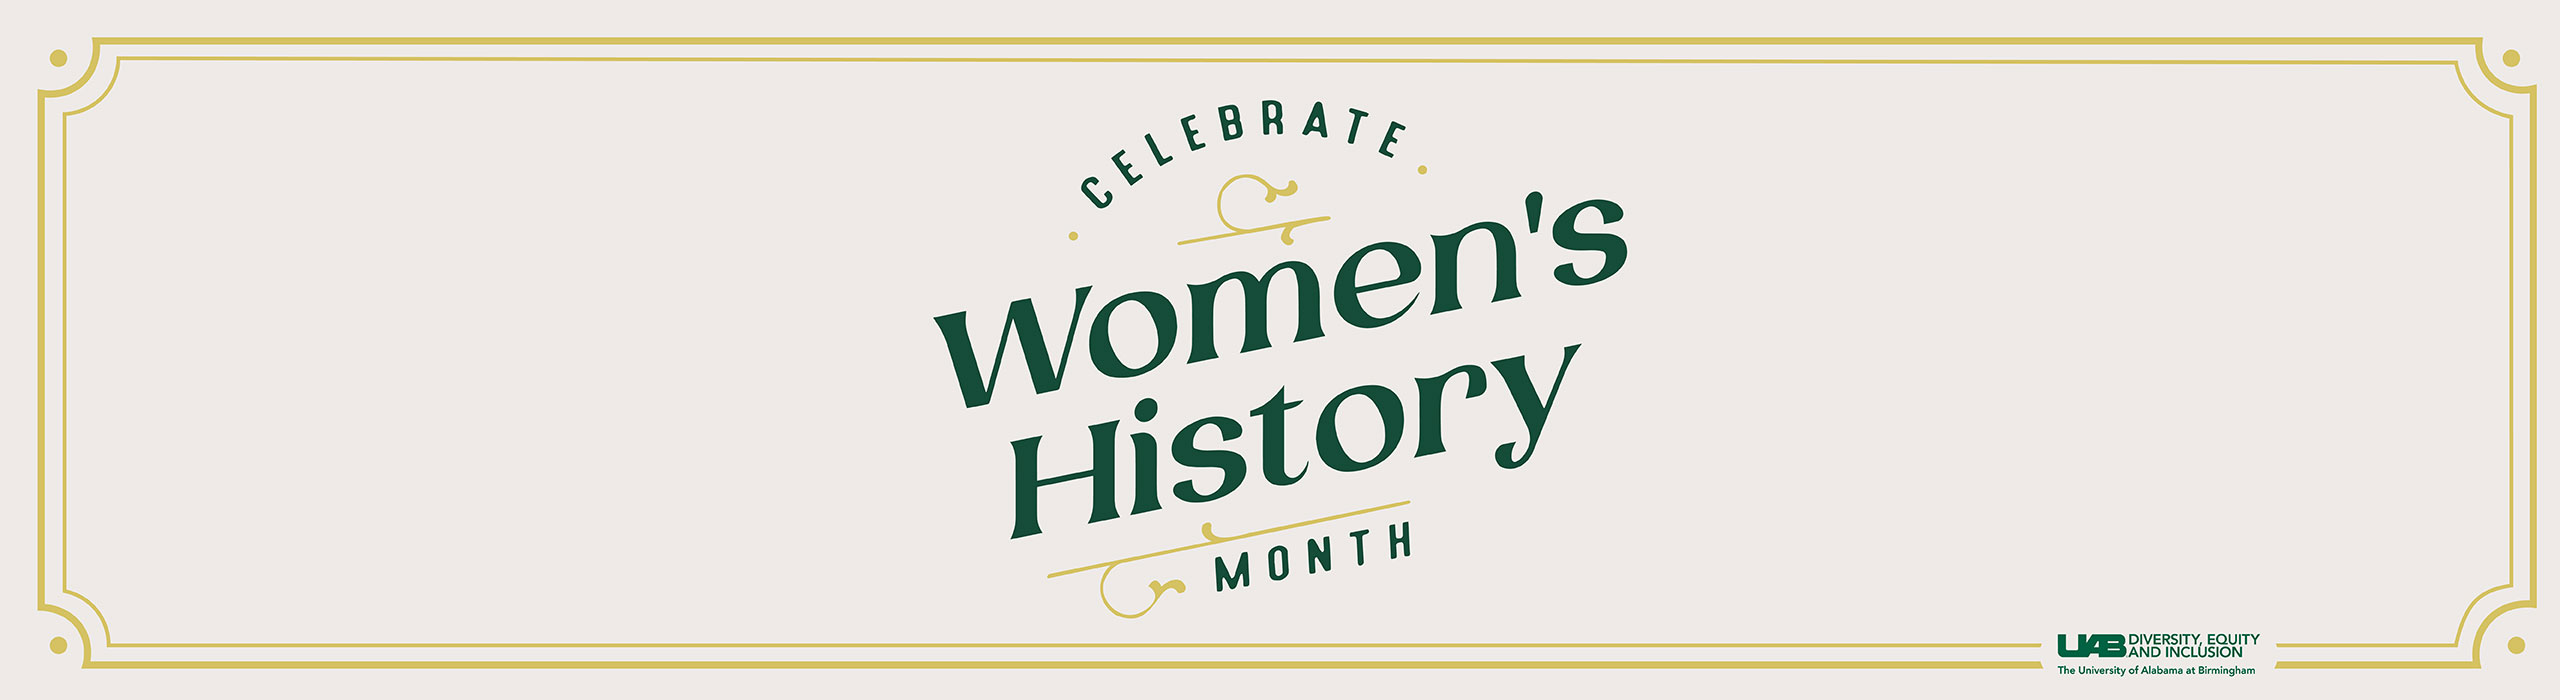 Women's History Month banner image